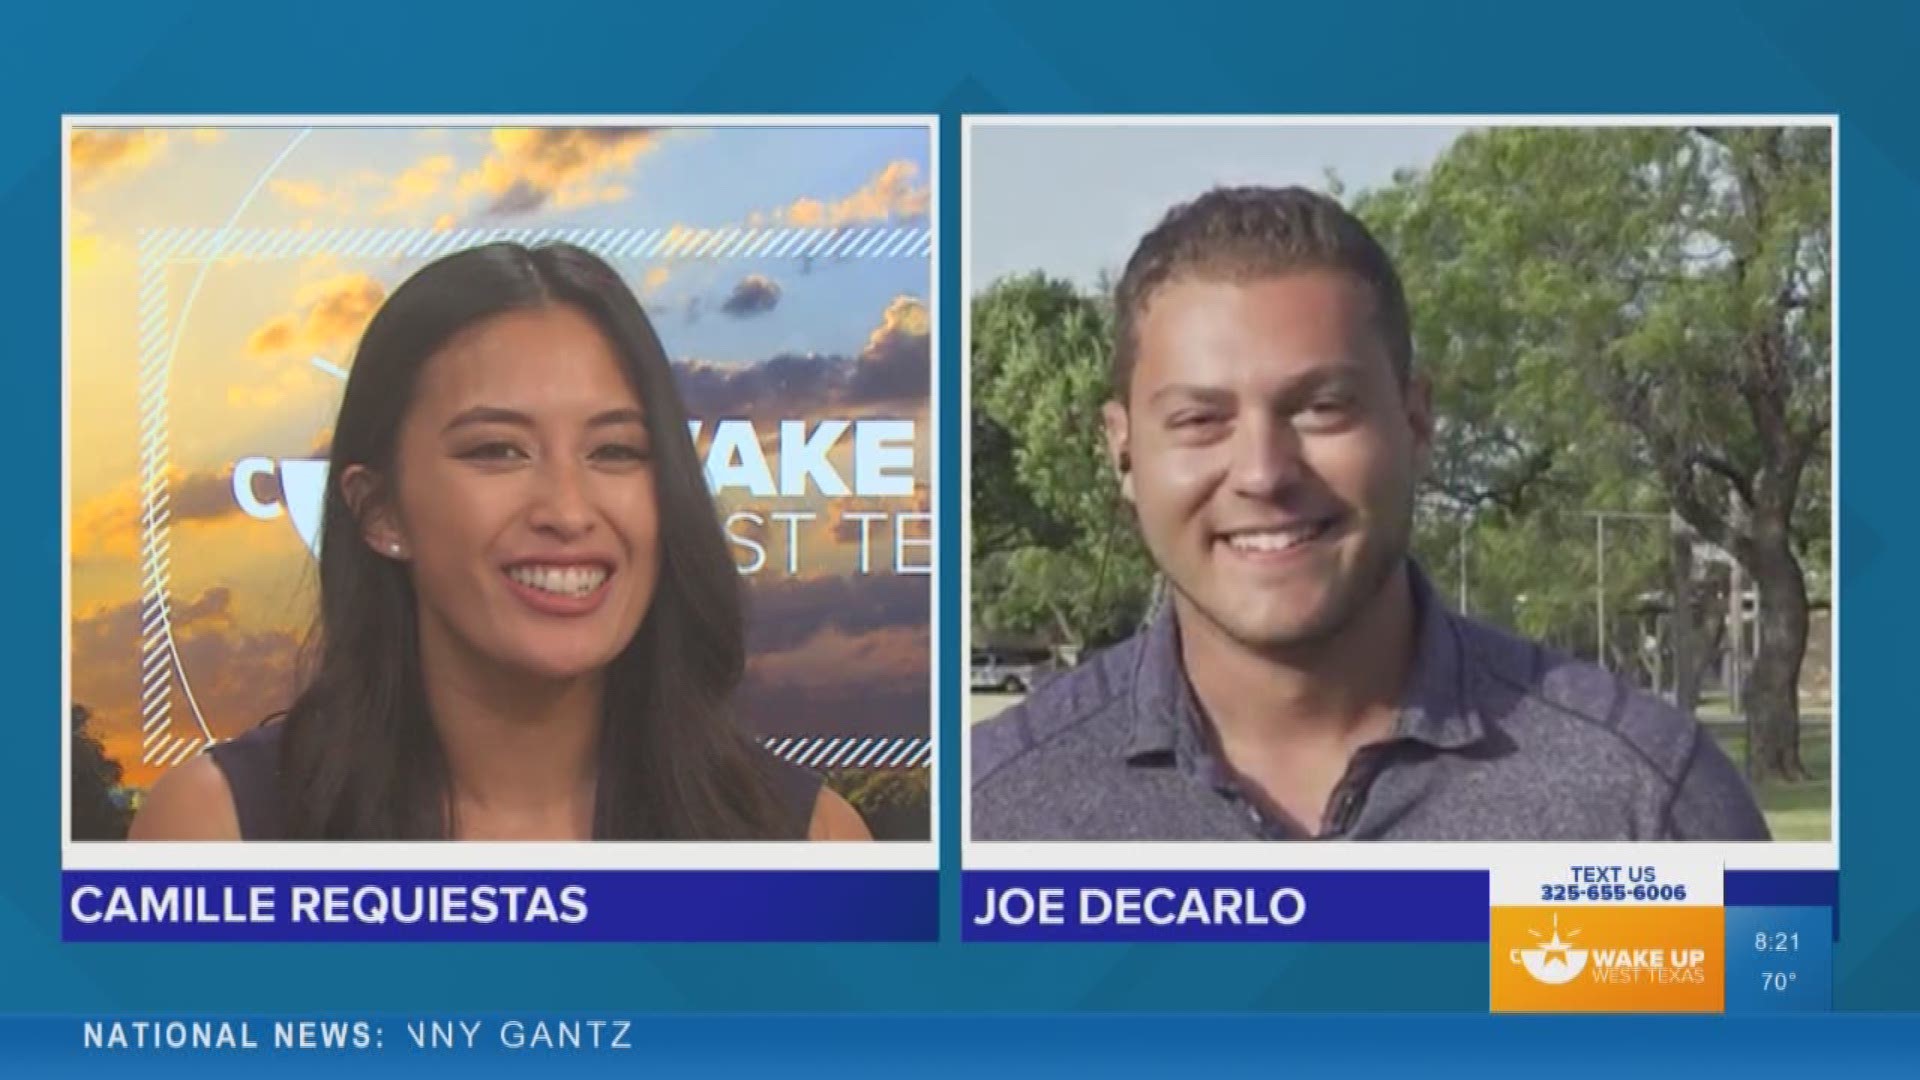 For 'Try it Tuesday' this week, Joe DeCarlo tries yoga and Camille Requiestas dances the 'Git Up' challenge.